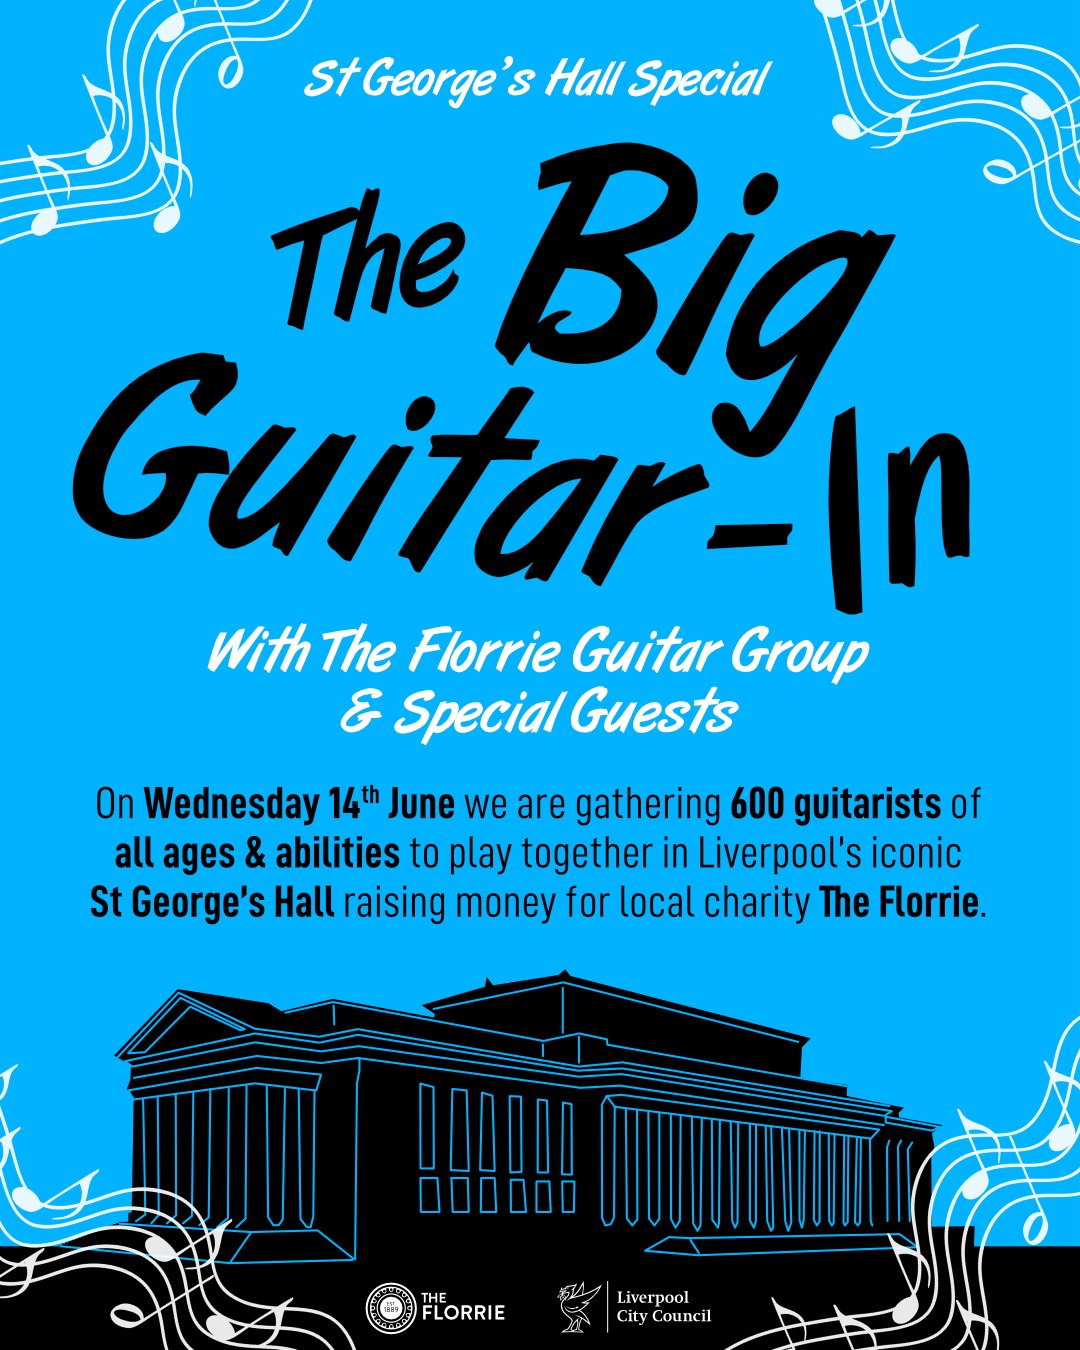 The Florrie event is coming to St George's Hall